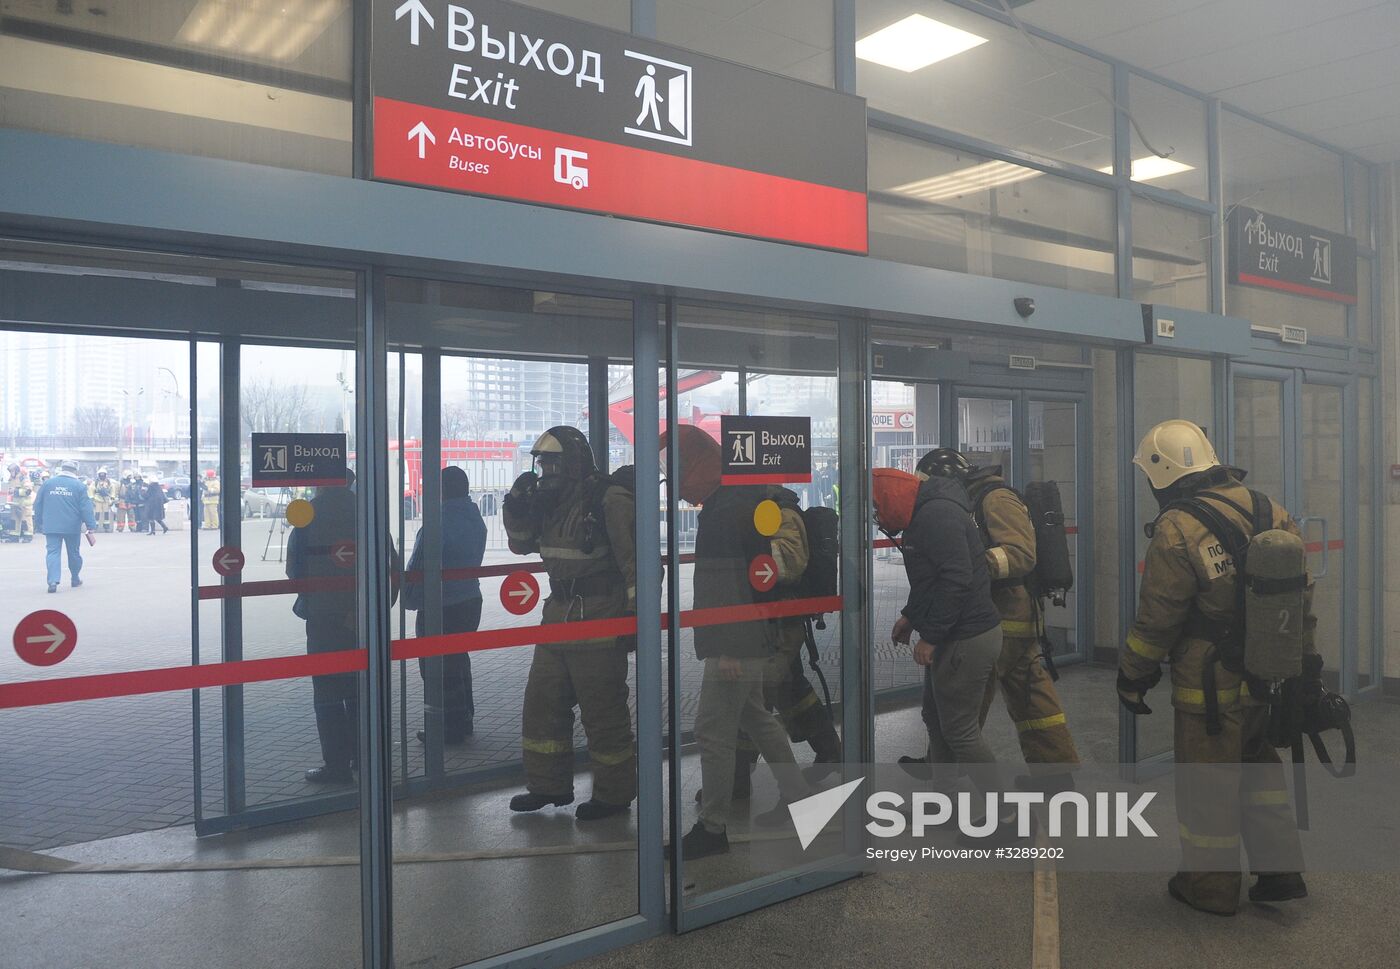 Tactical exercises at Rostov-on-Don train station